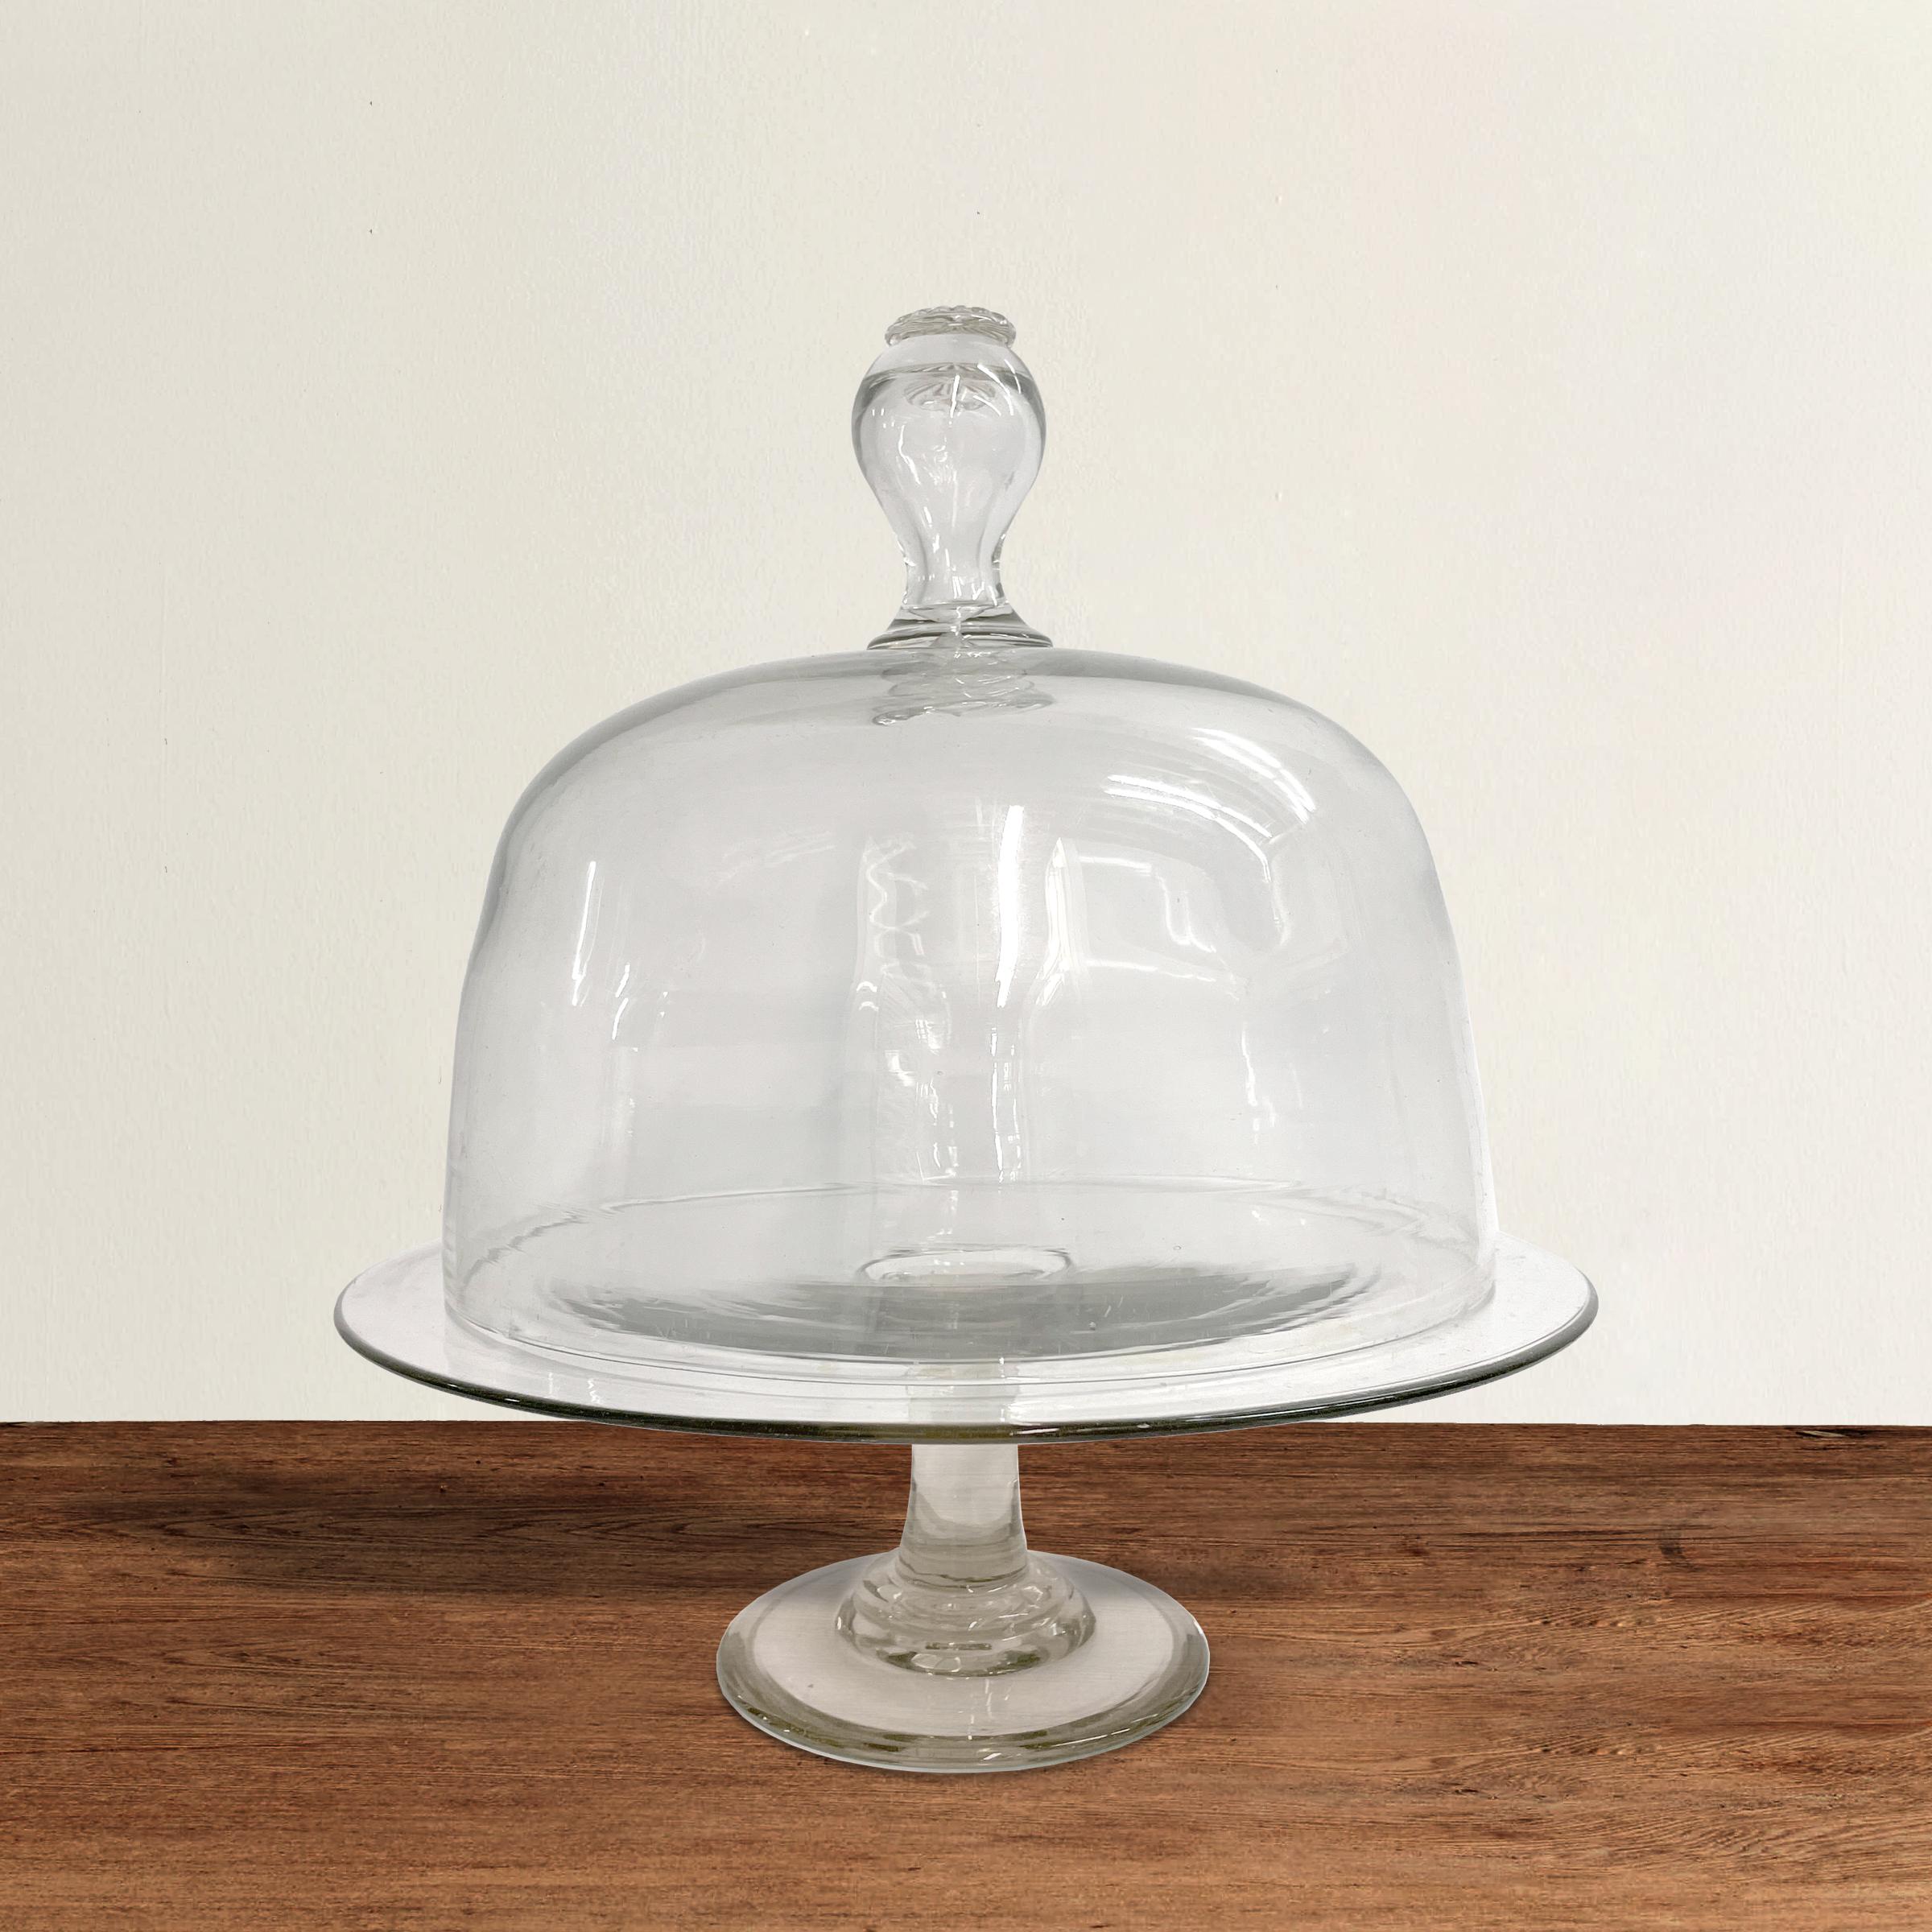 An incredible 19th century Belgian hand-blown glass food stand and dome with a wonderful knob with a captured bubble inside, and a crimped glass button on top. Perfect for showcasing your cake masterpieces, serving cheese, or protecting your